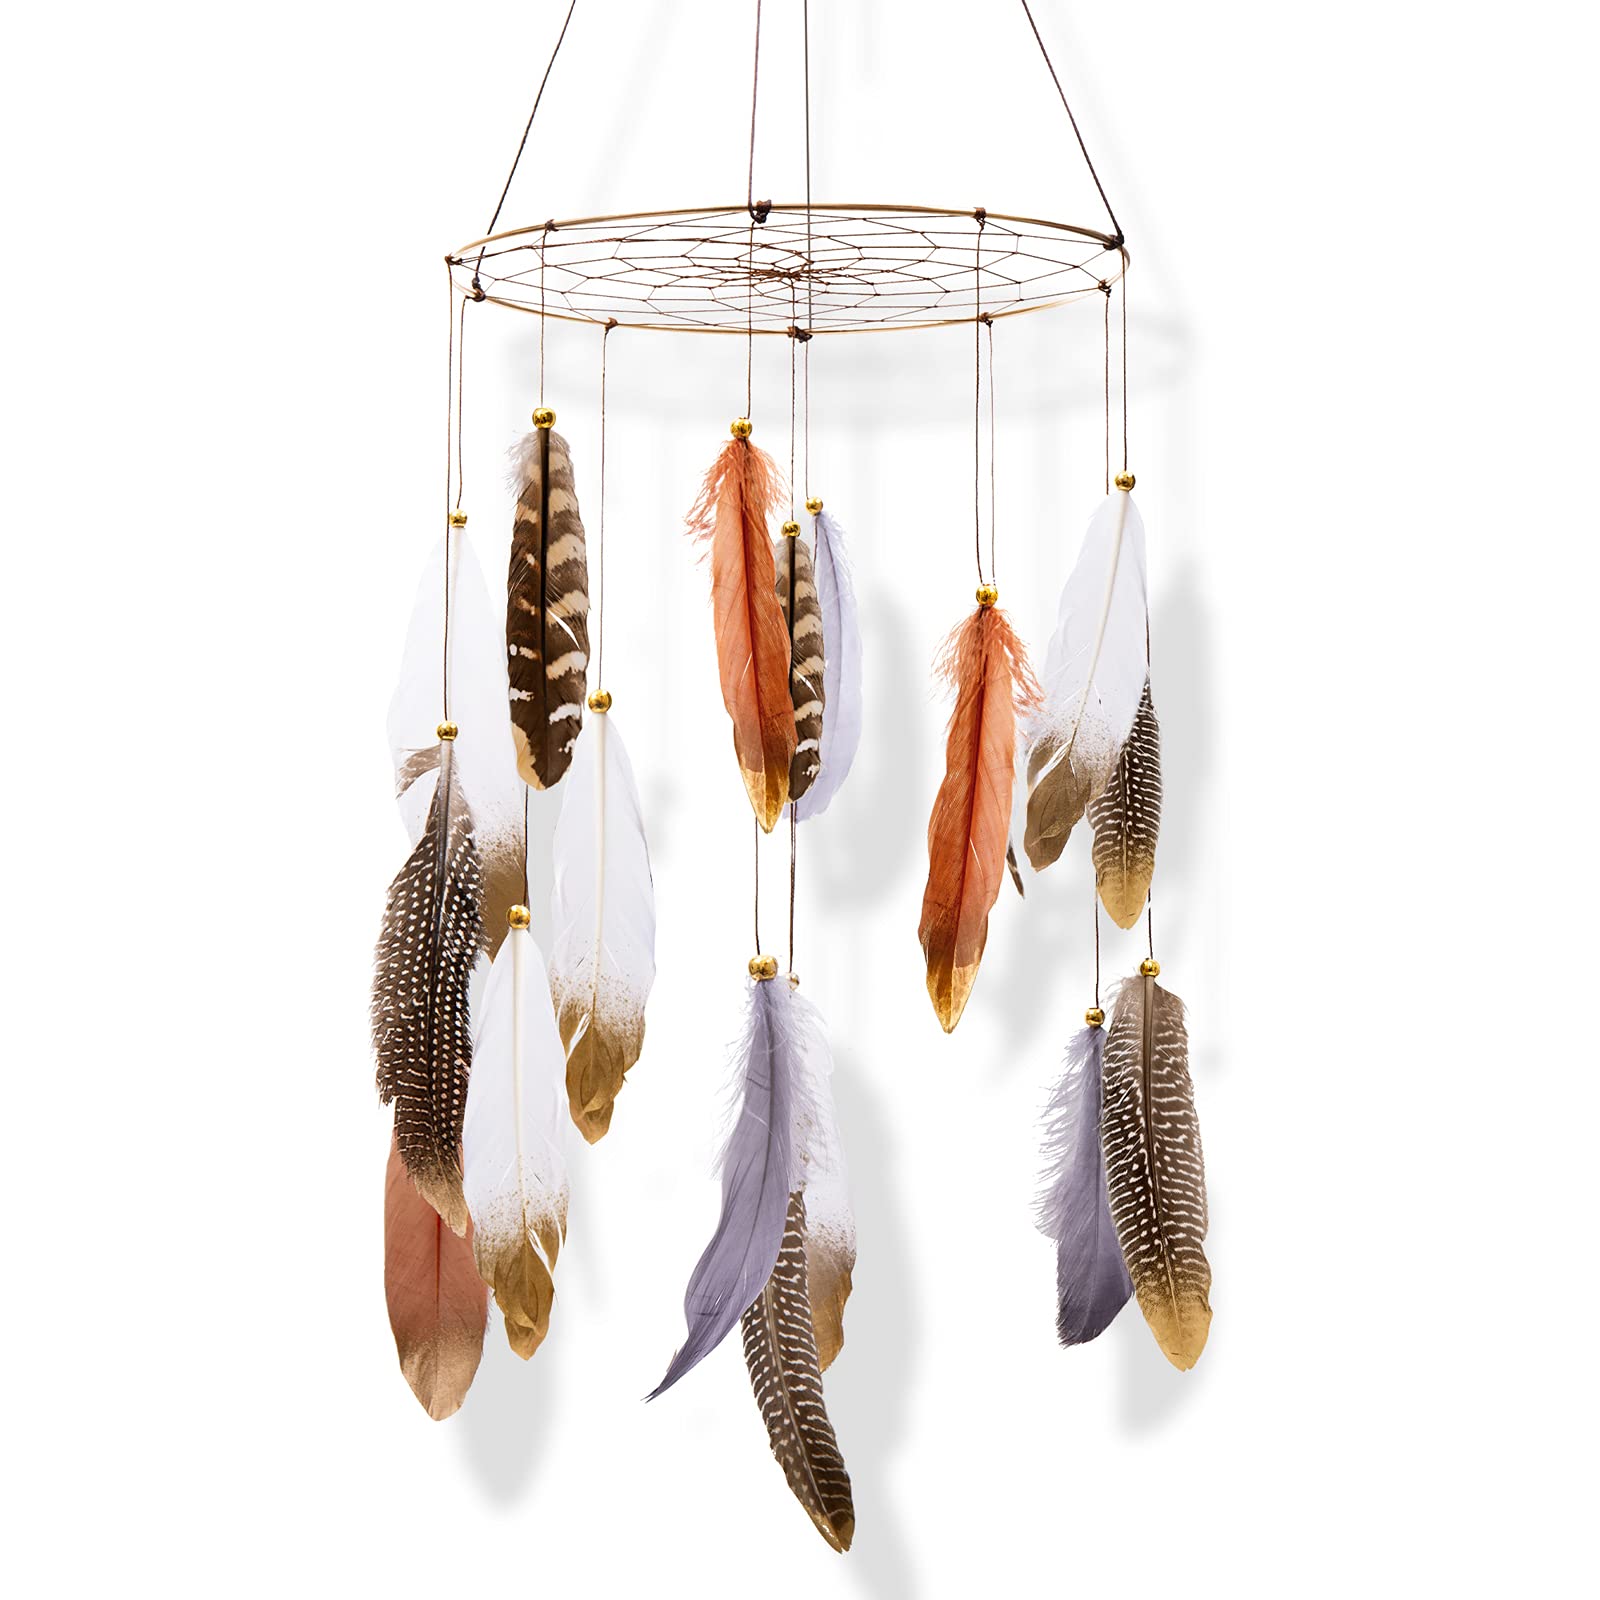 ANROYE Boho Feather Baby Mobile for Crib, Bohemian Nursery Gender Neutral Wall Hanging Decor, Large Dream Catcher Ornament Hanger Gift